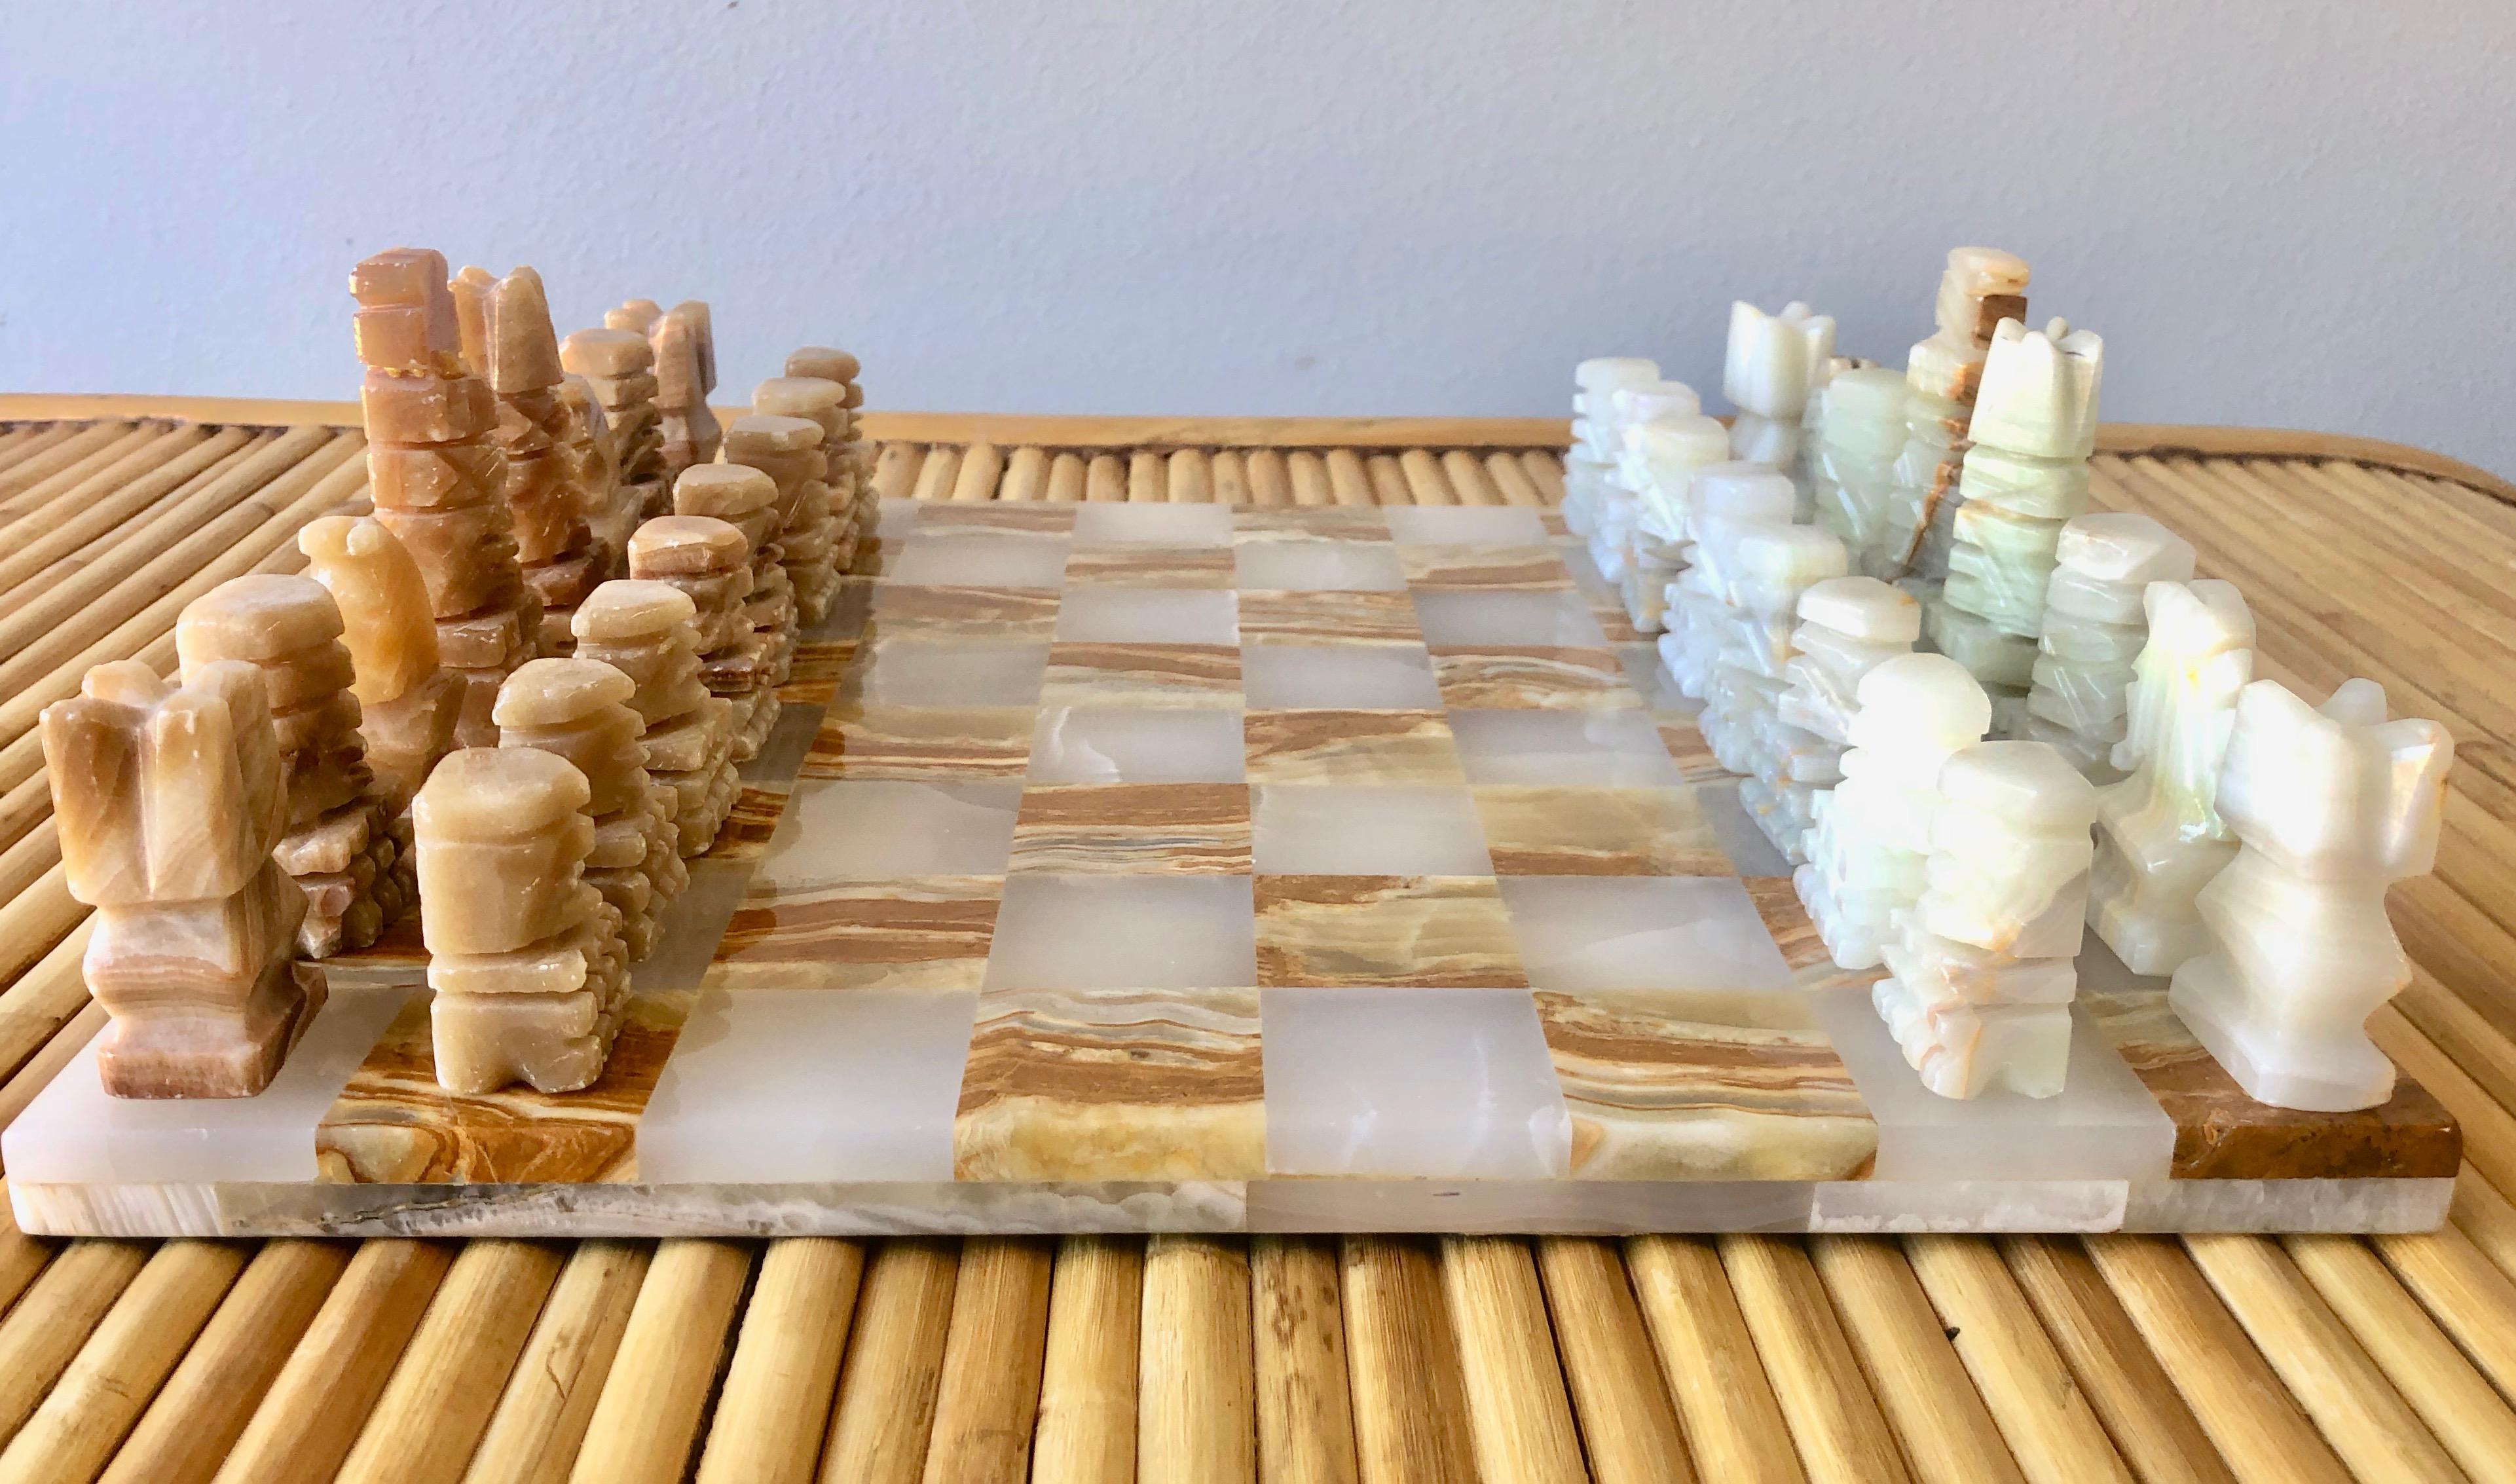 Midcentury onyx chess set. Chess board and all pieces included. This set is a great addition for any game room and also looks great as a decorative piece.